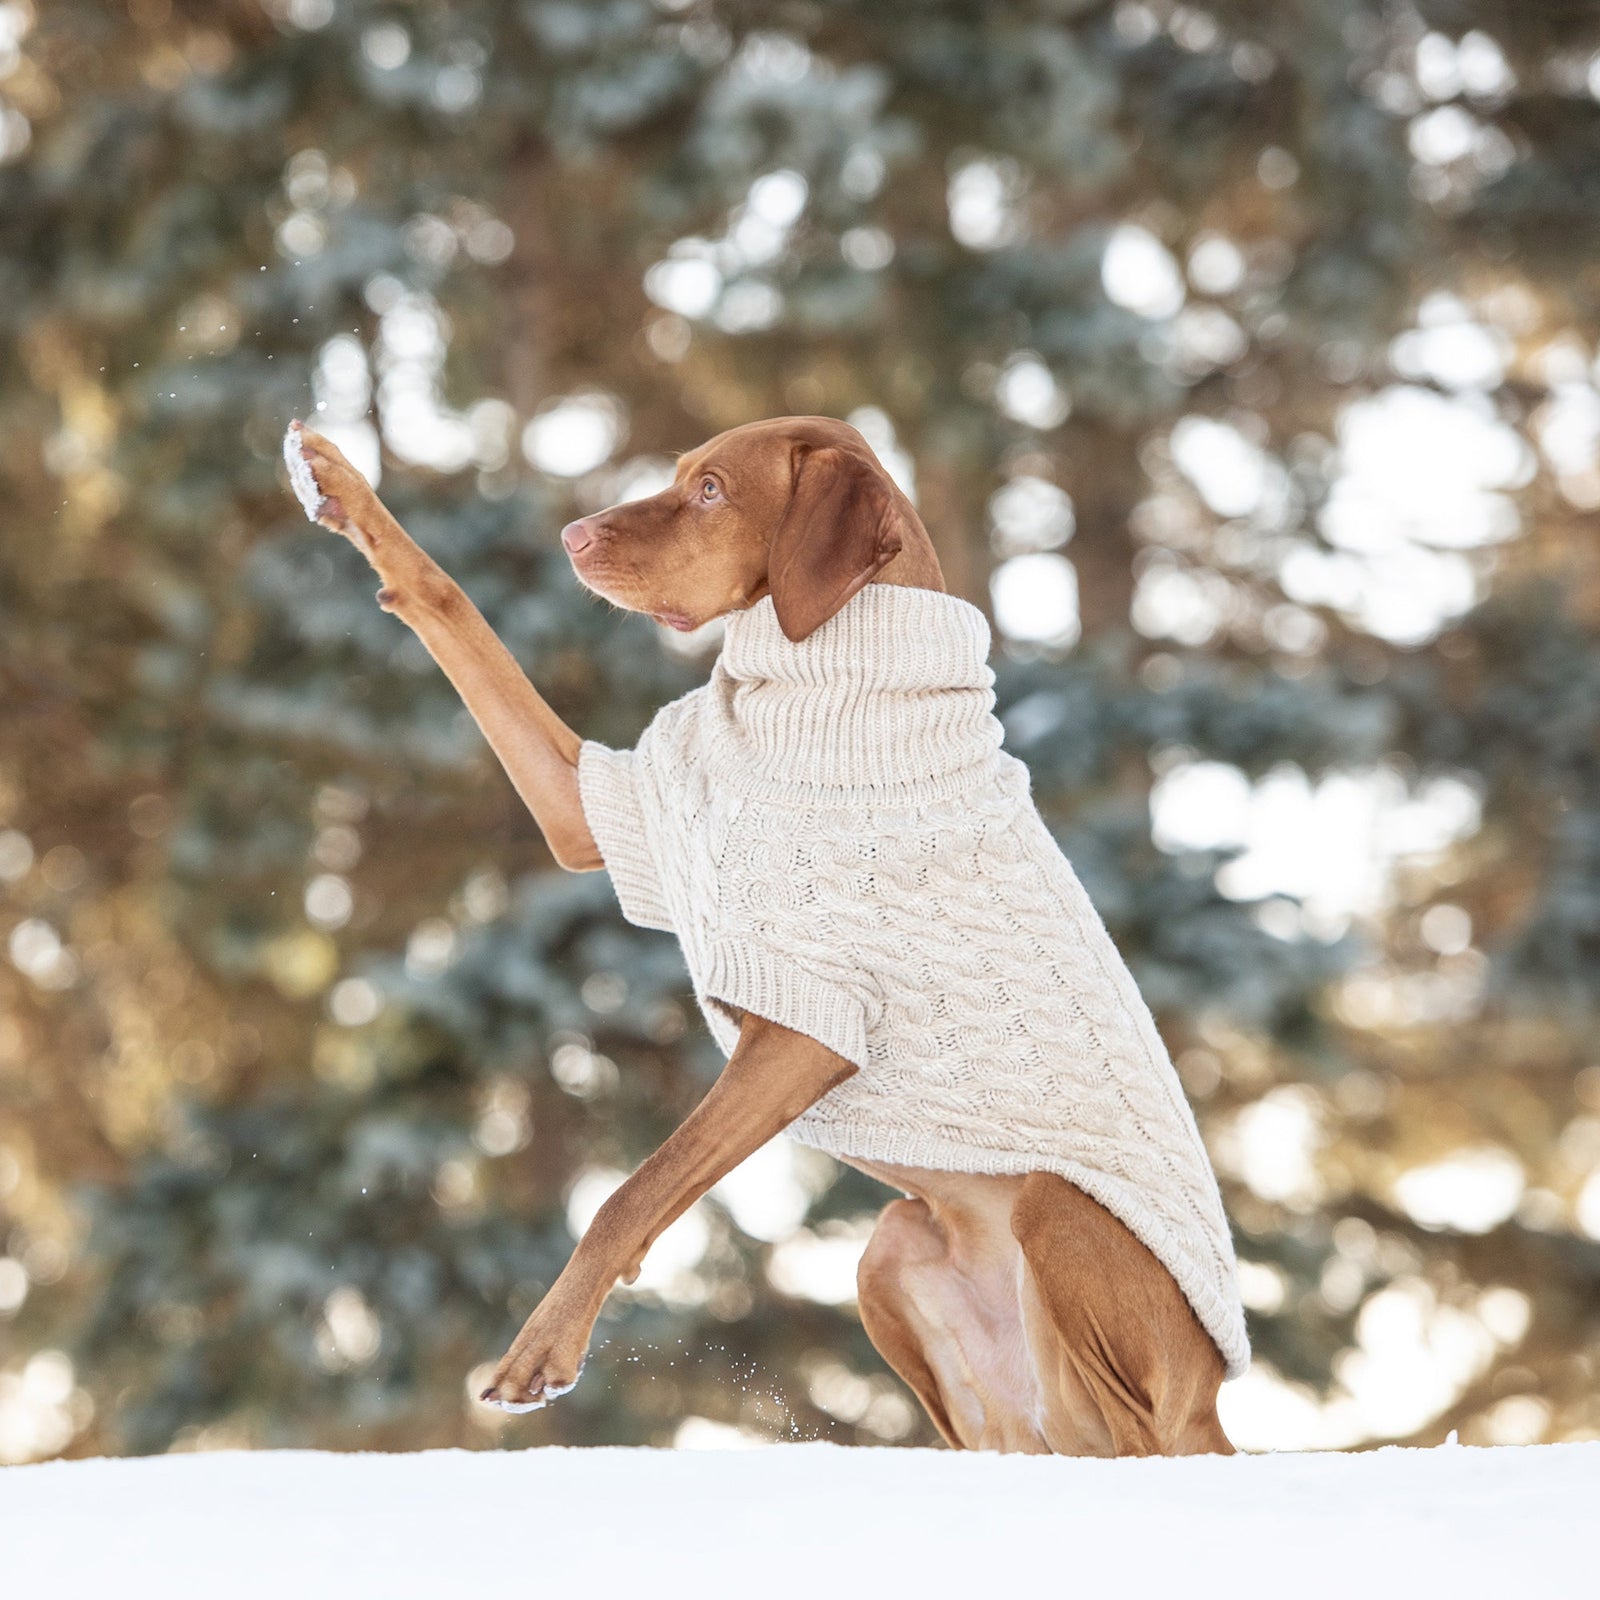 Chalet Dog Sweater - Oatmeal